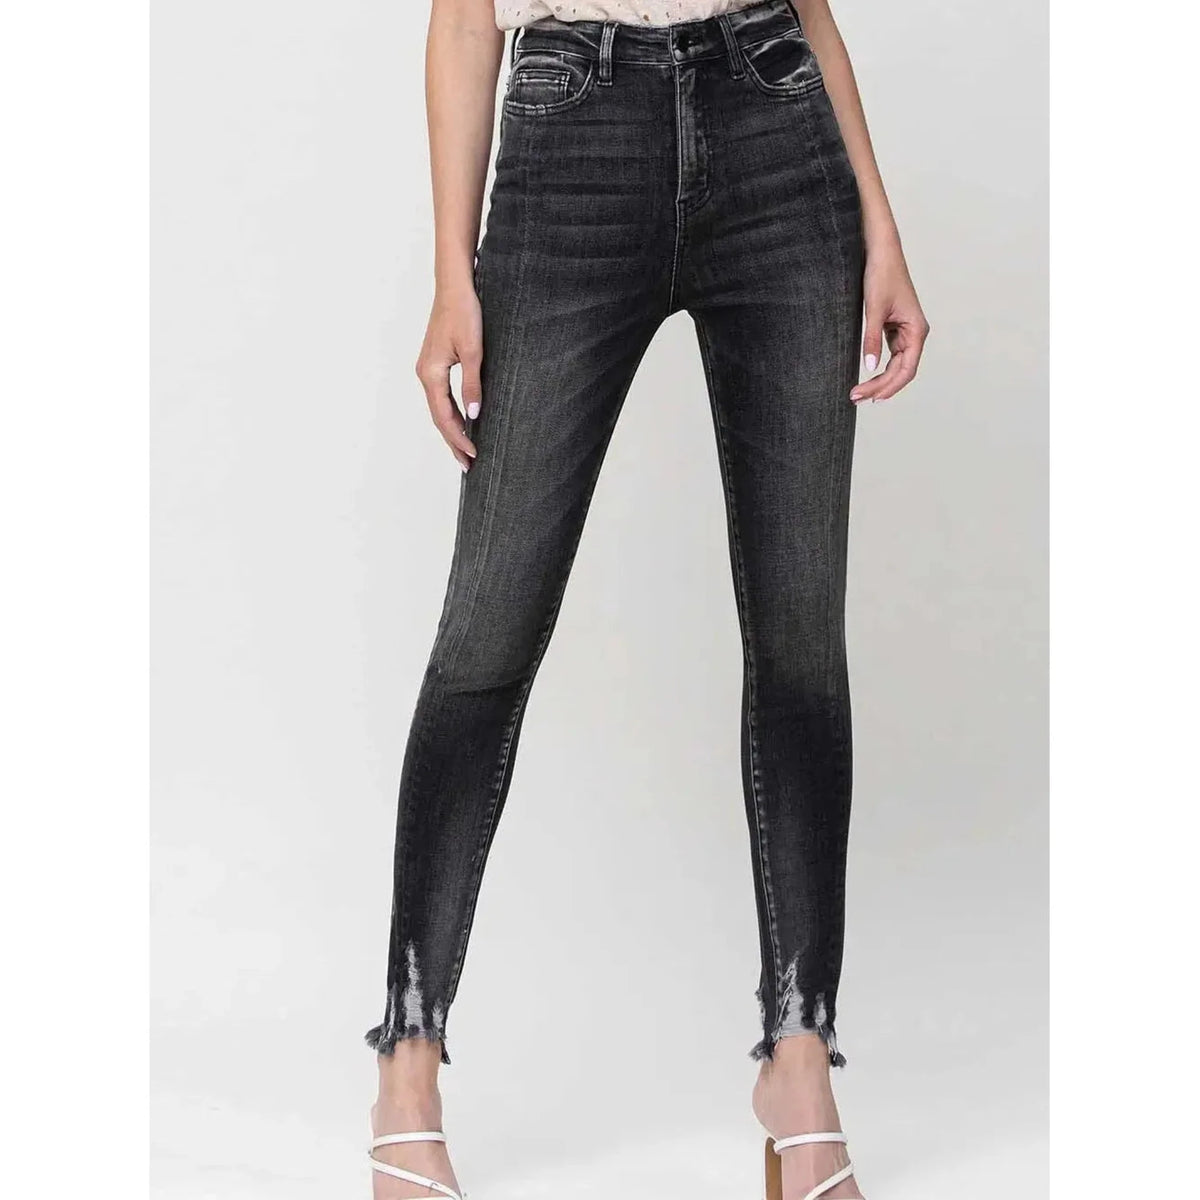 Super High Rise Black Ankle Skinny Jeans - Women's Clothing